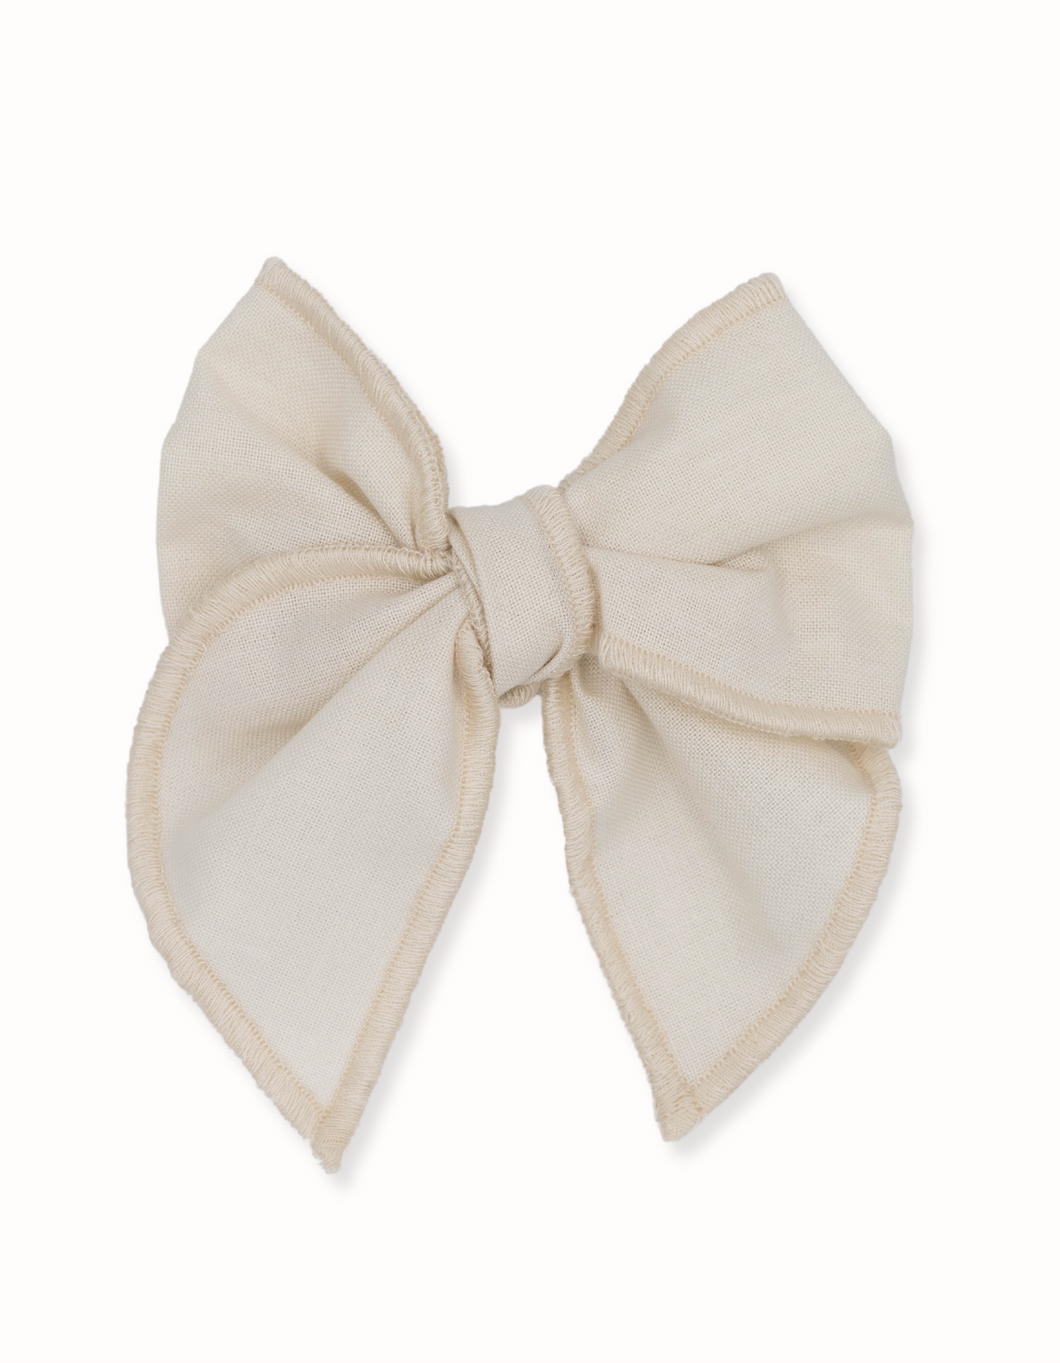 Livy Lou Collection Ivory Fable Bow in 100% organic cotton in cream color, fall collection, back to school collection, perfect  for daily wear and special occasions.